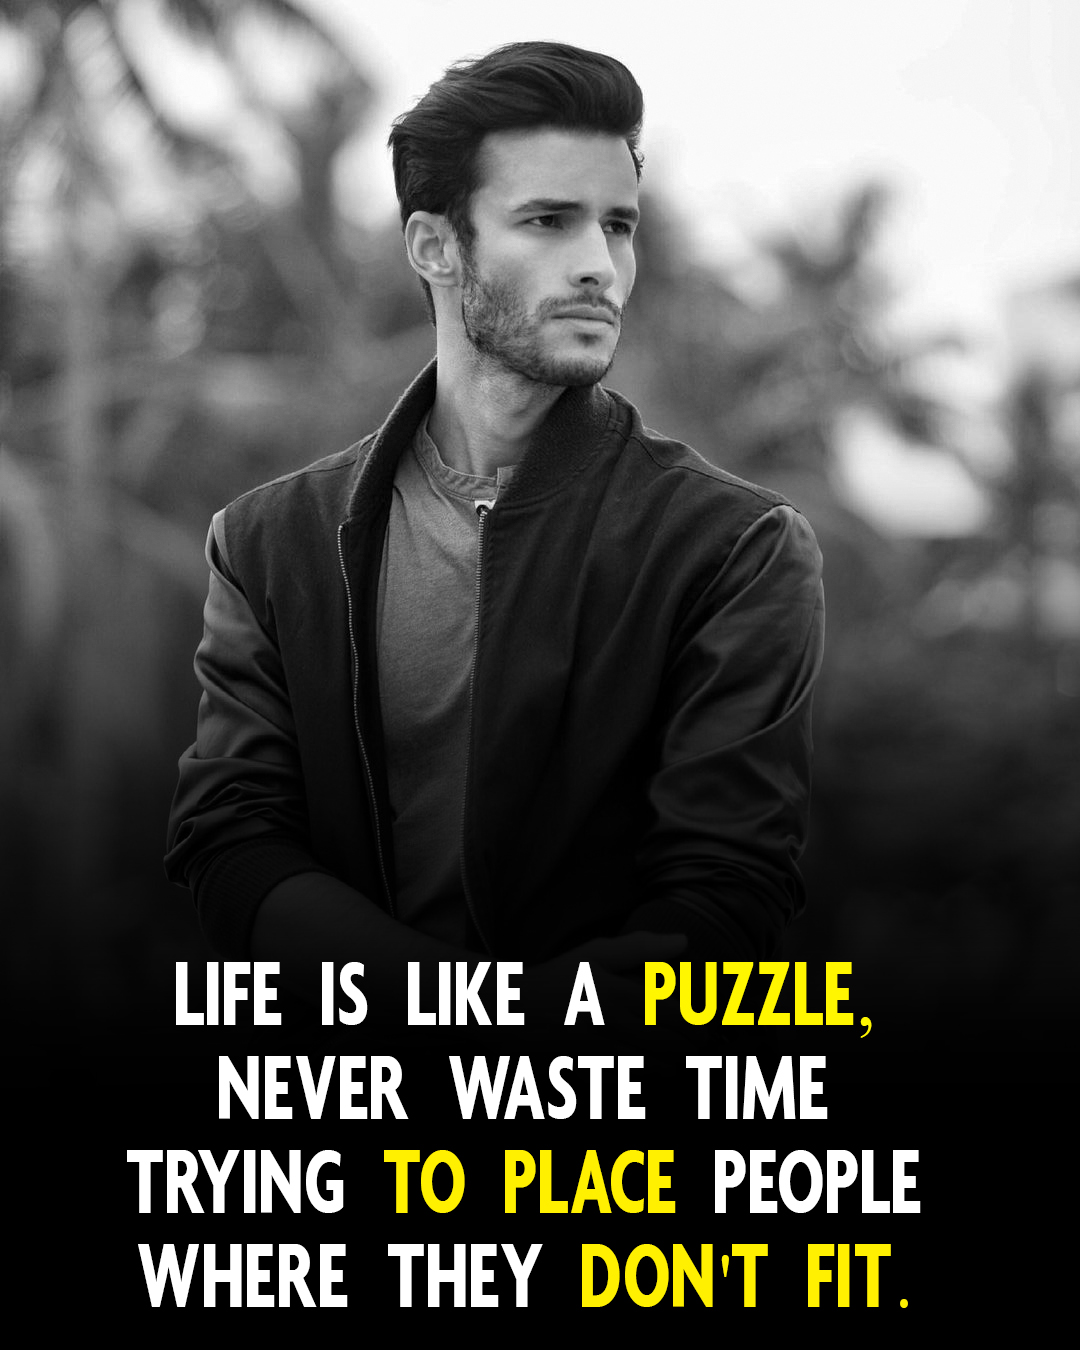 Life is Like a puzzle, never waste time trying to place people where they don’t fit